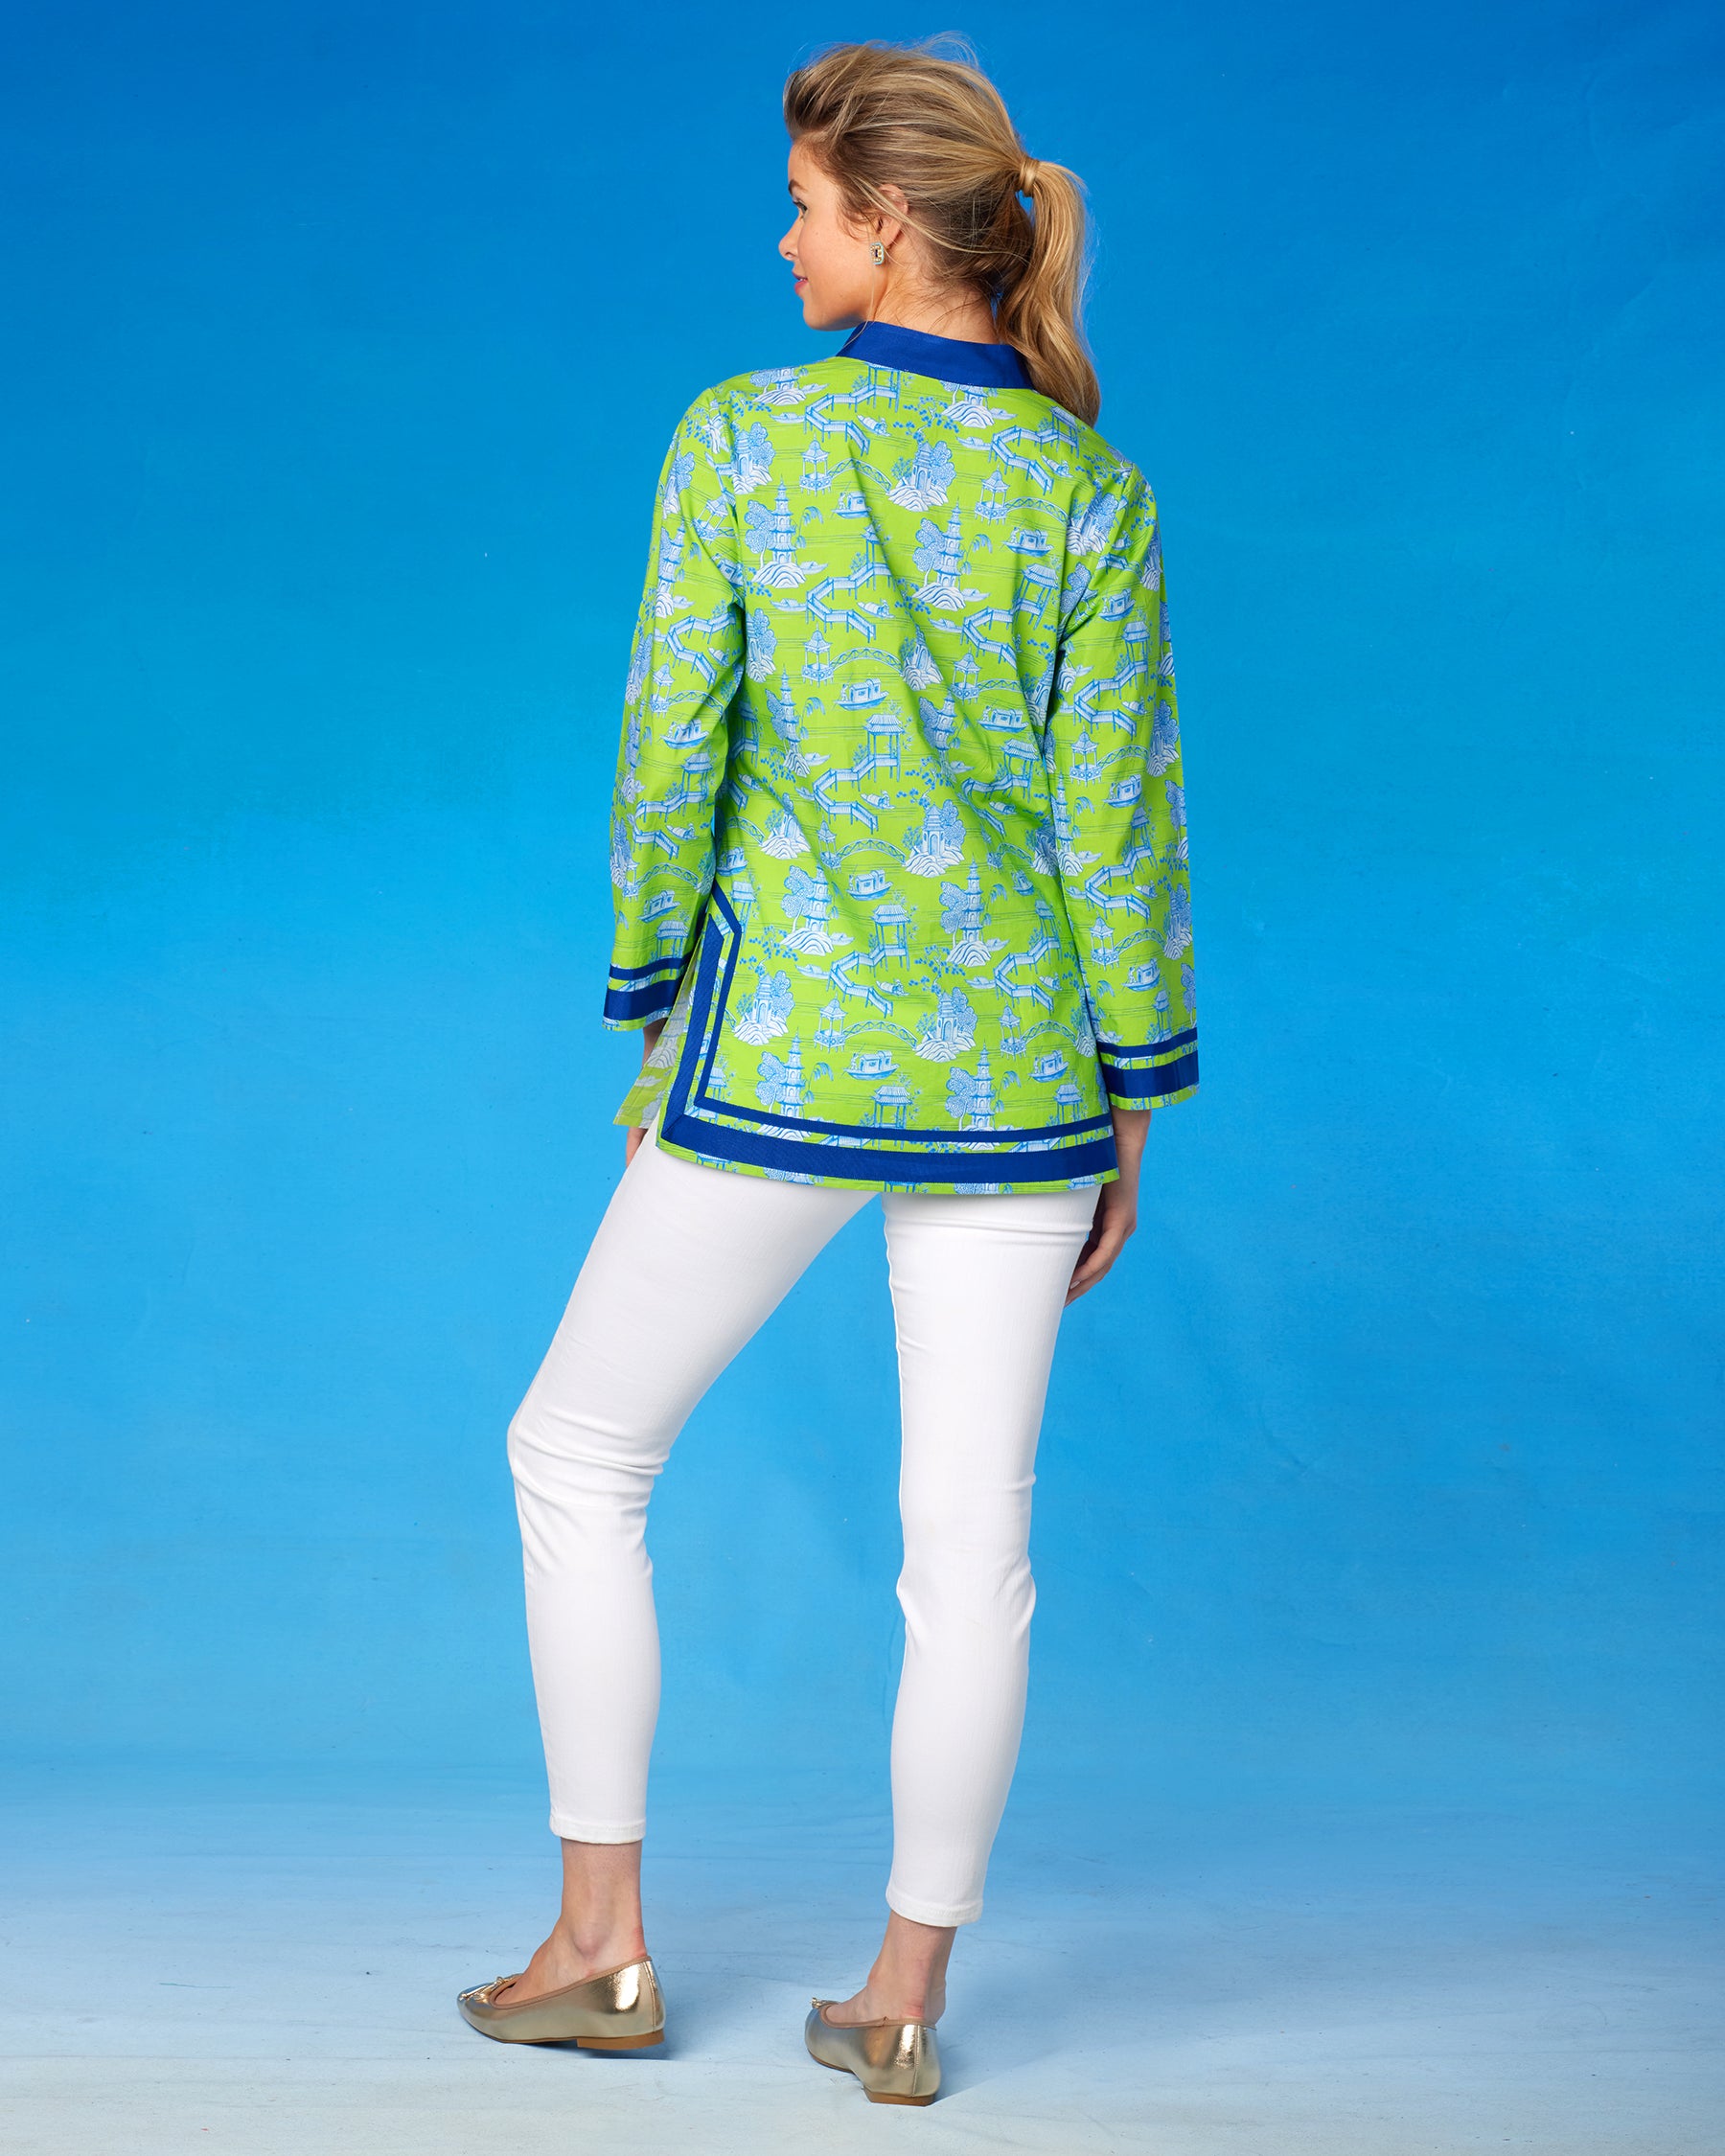 Capri Tunic in Pagoda Toile Lime Green and Blue-Back View